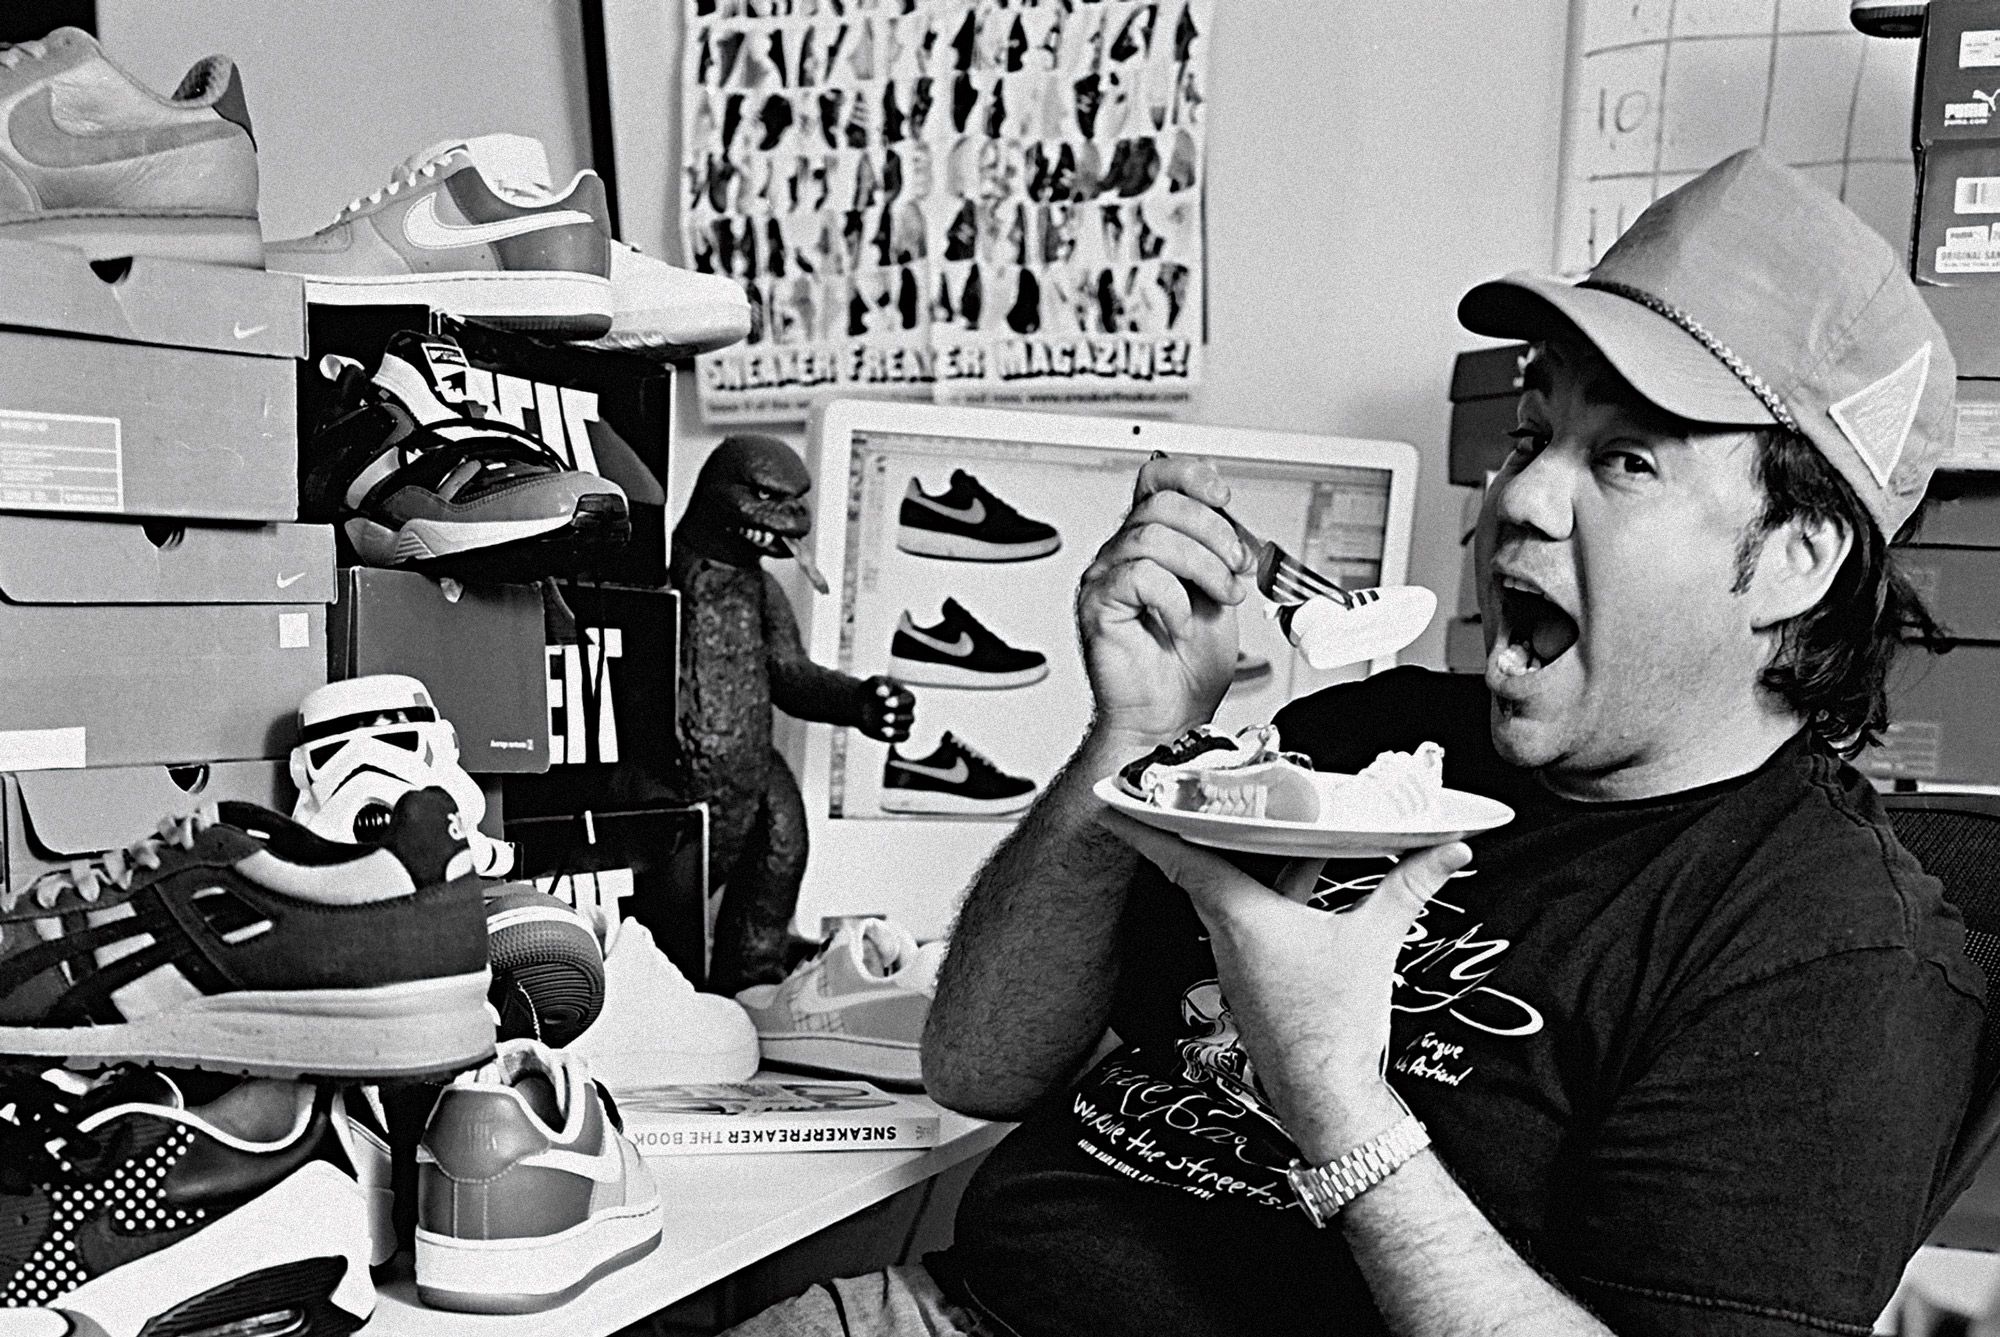 Sneaker Freaker founder, Woody, surrounded by shoes and shoeboxes.